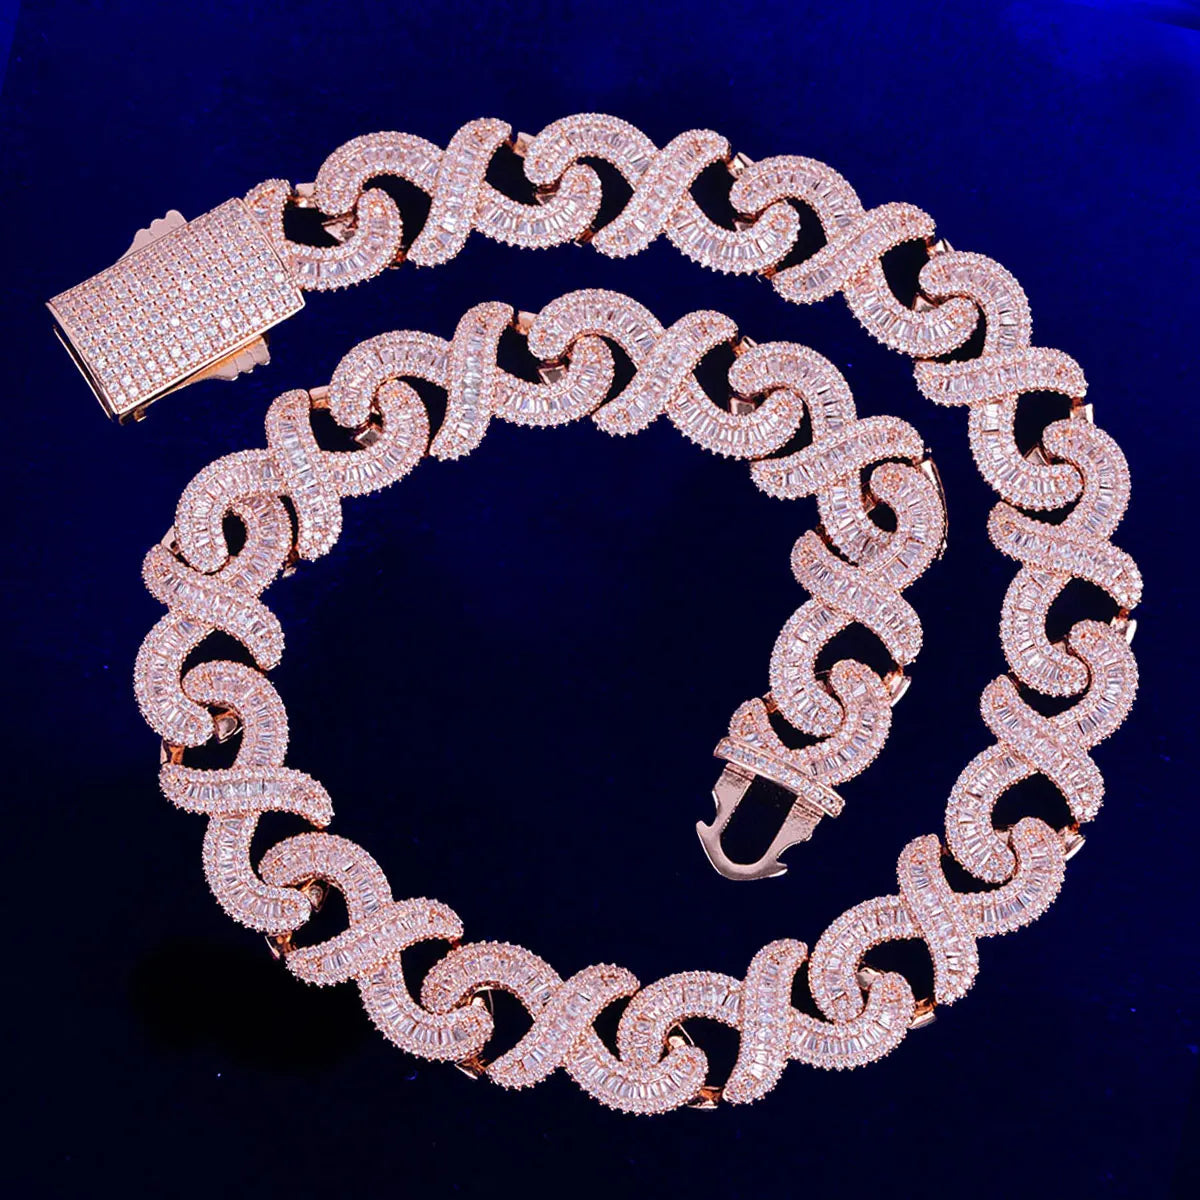 ICED INFINITY BAGUETTE DIAMOND NECKLACE